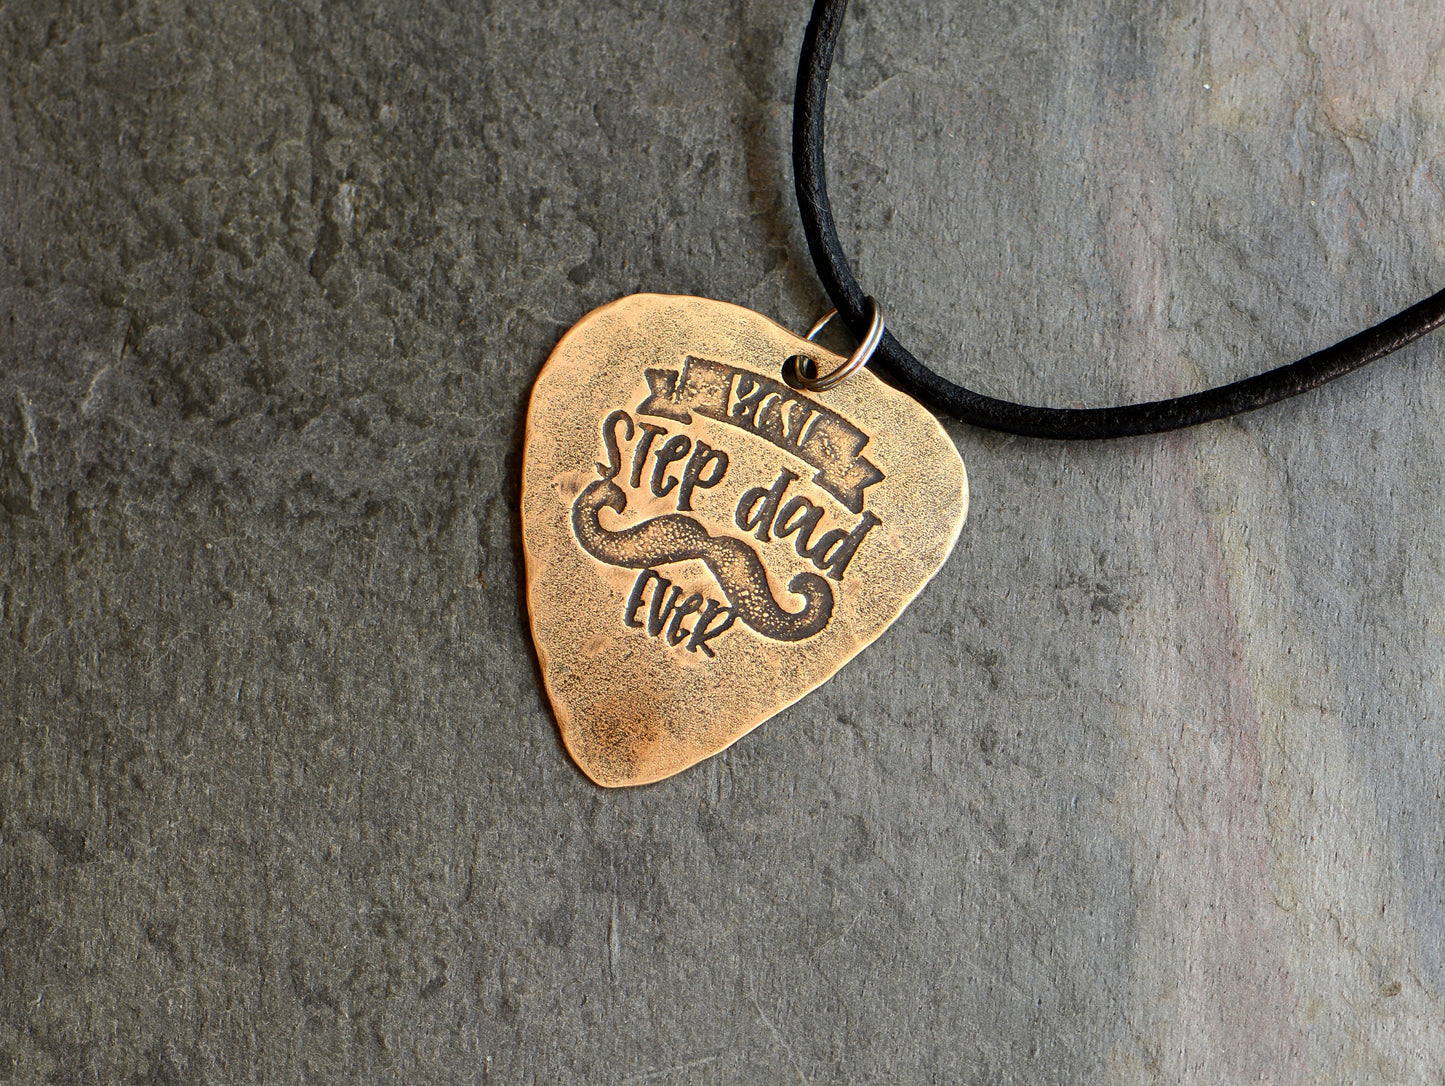 Guitar pick necklace stamped with best stepdad ever